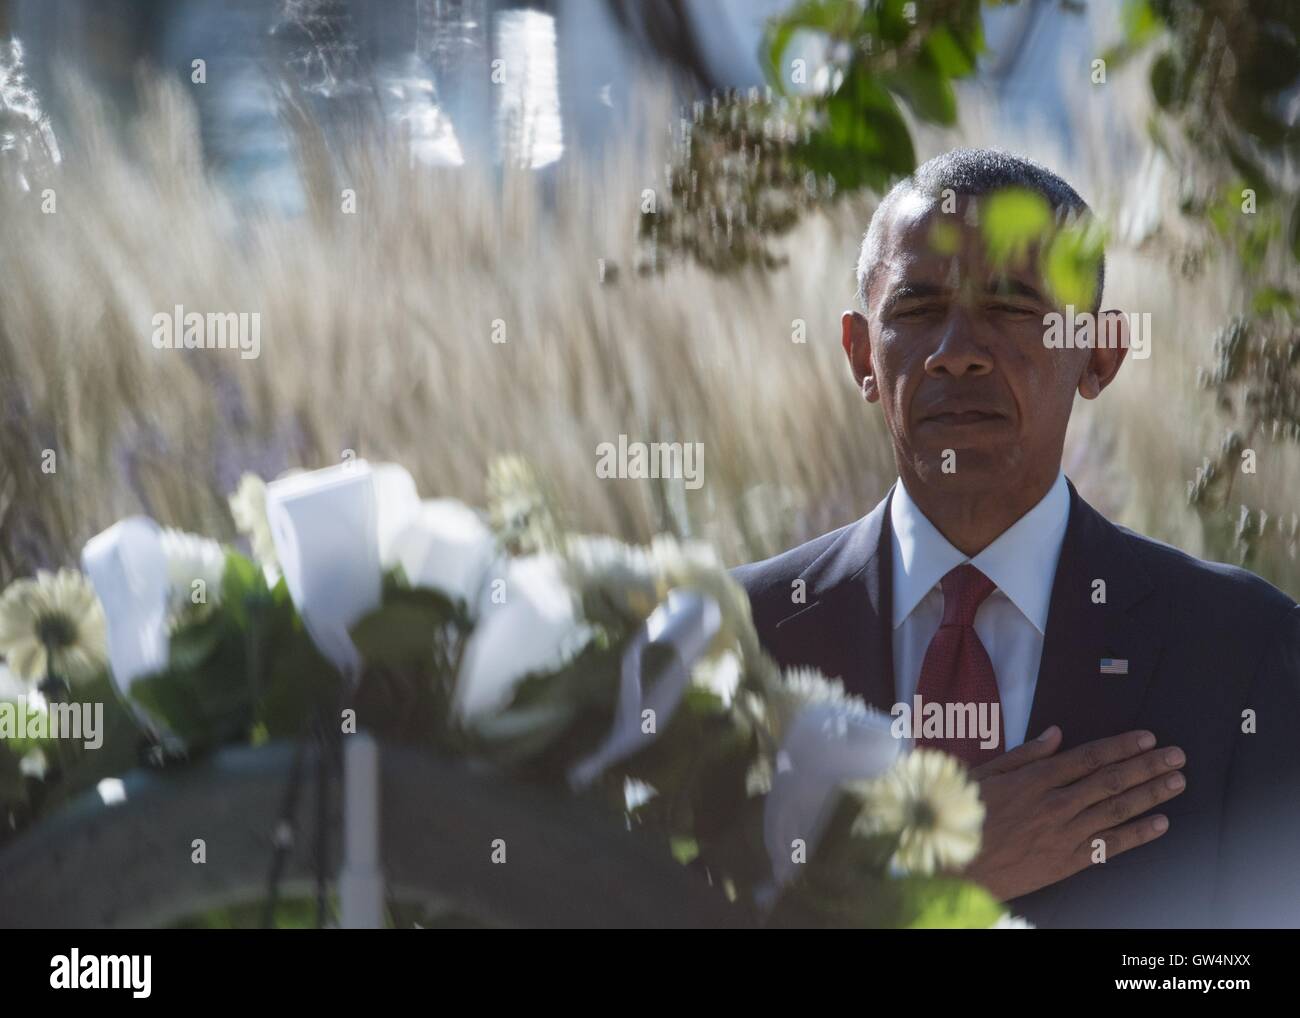 U.S President Barack Obama salutes after placing a wreath at the Pentagon Memorial at a remembrance ceremony commemorating the 15th anniversary of the 9/11 terrorist attacks at the Pentagon September 11, 2016 in Arlington, Virginia. Stock Photo